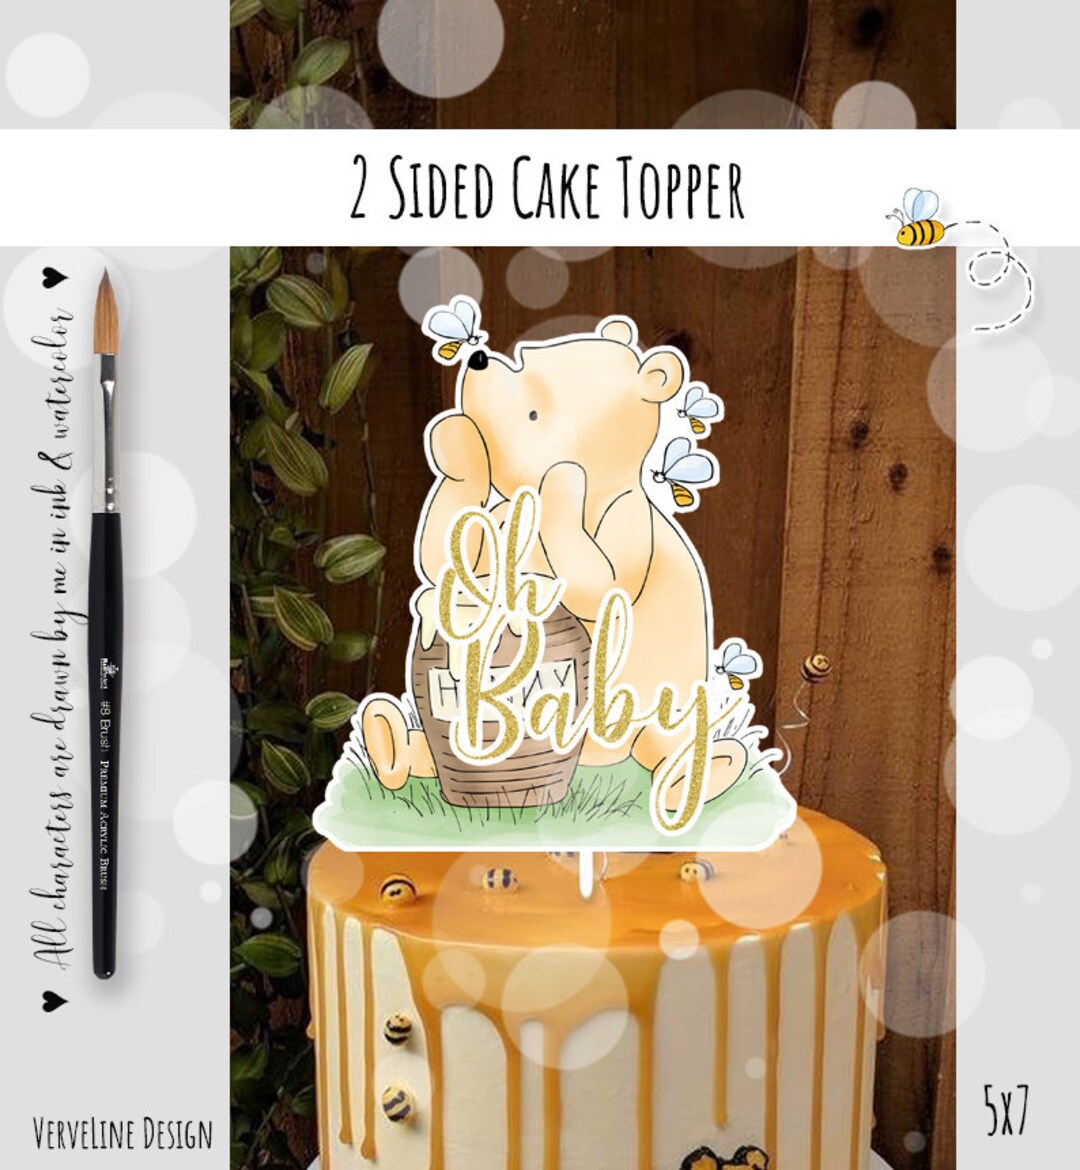  MEMOVAN Winnie Cake Topper Oh Baby Classic The Pooh